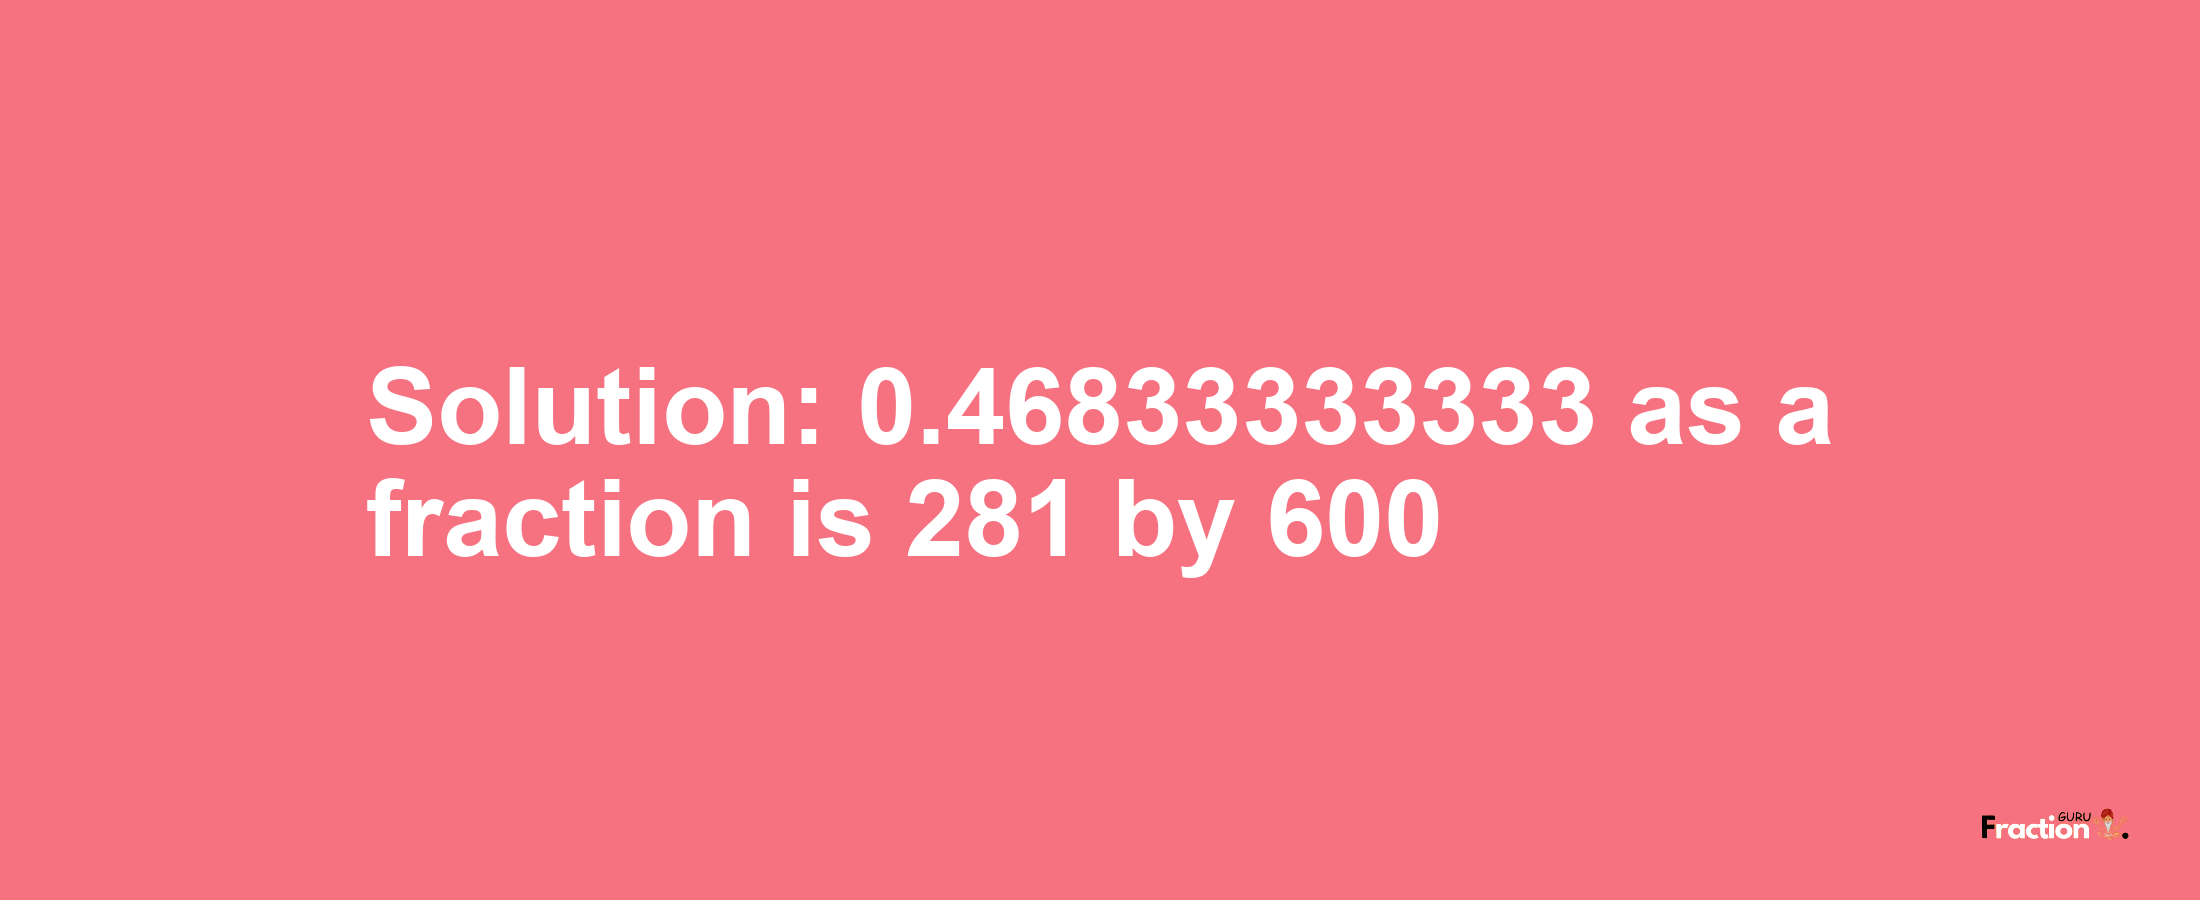 Solution:0.46833333333 as a fraction is 281/600